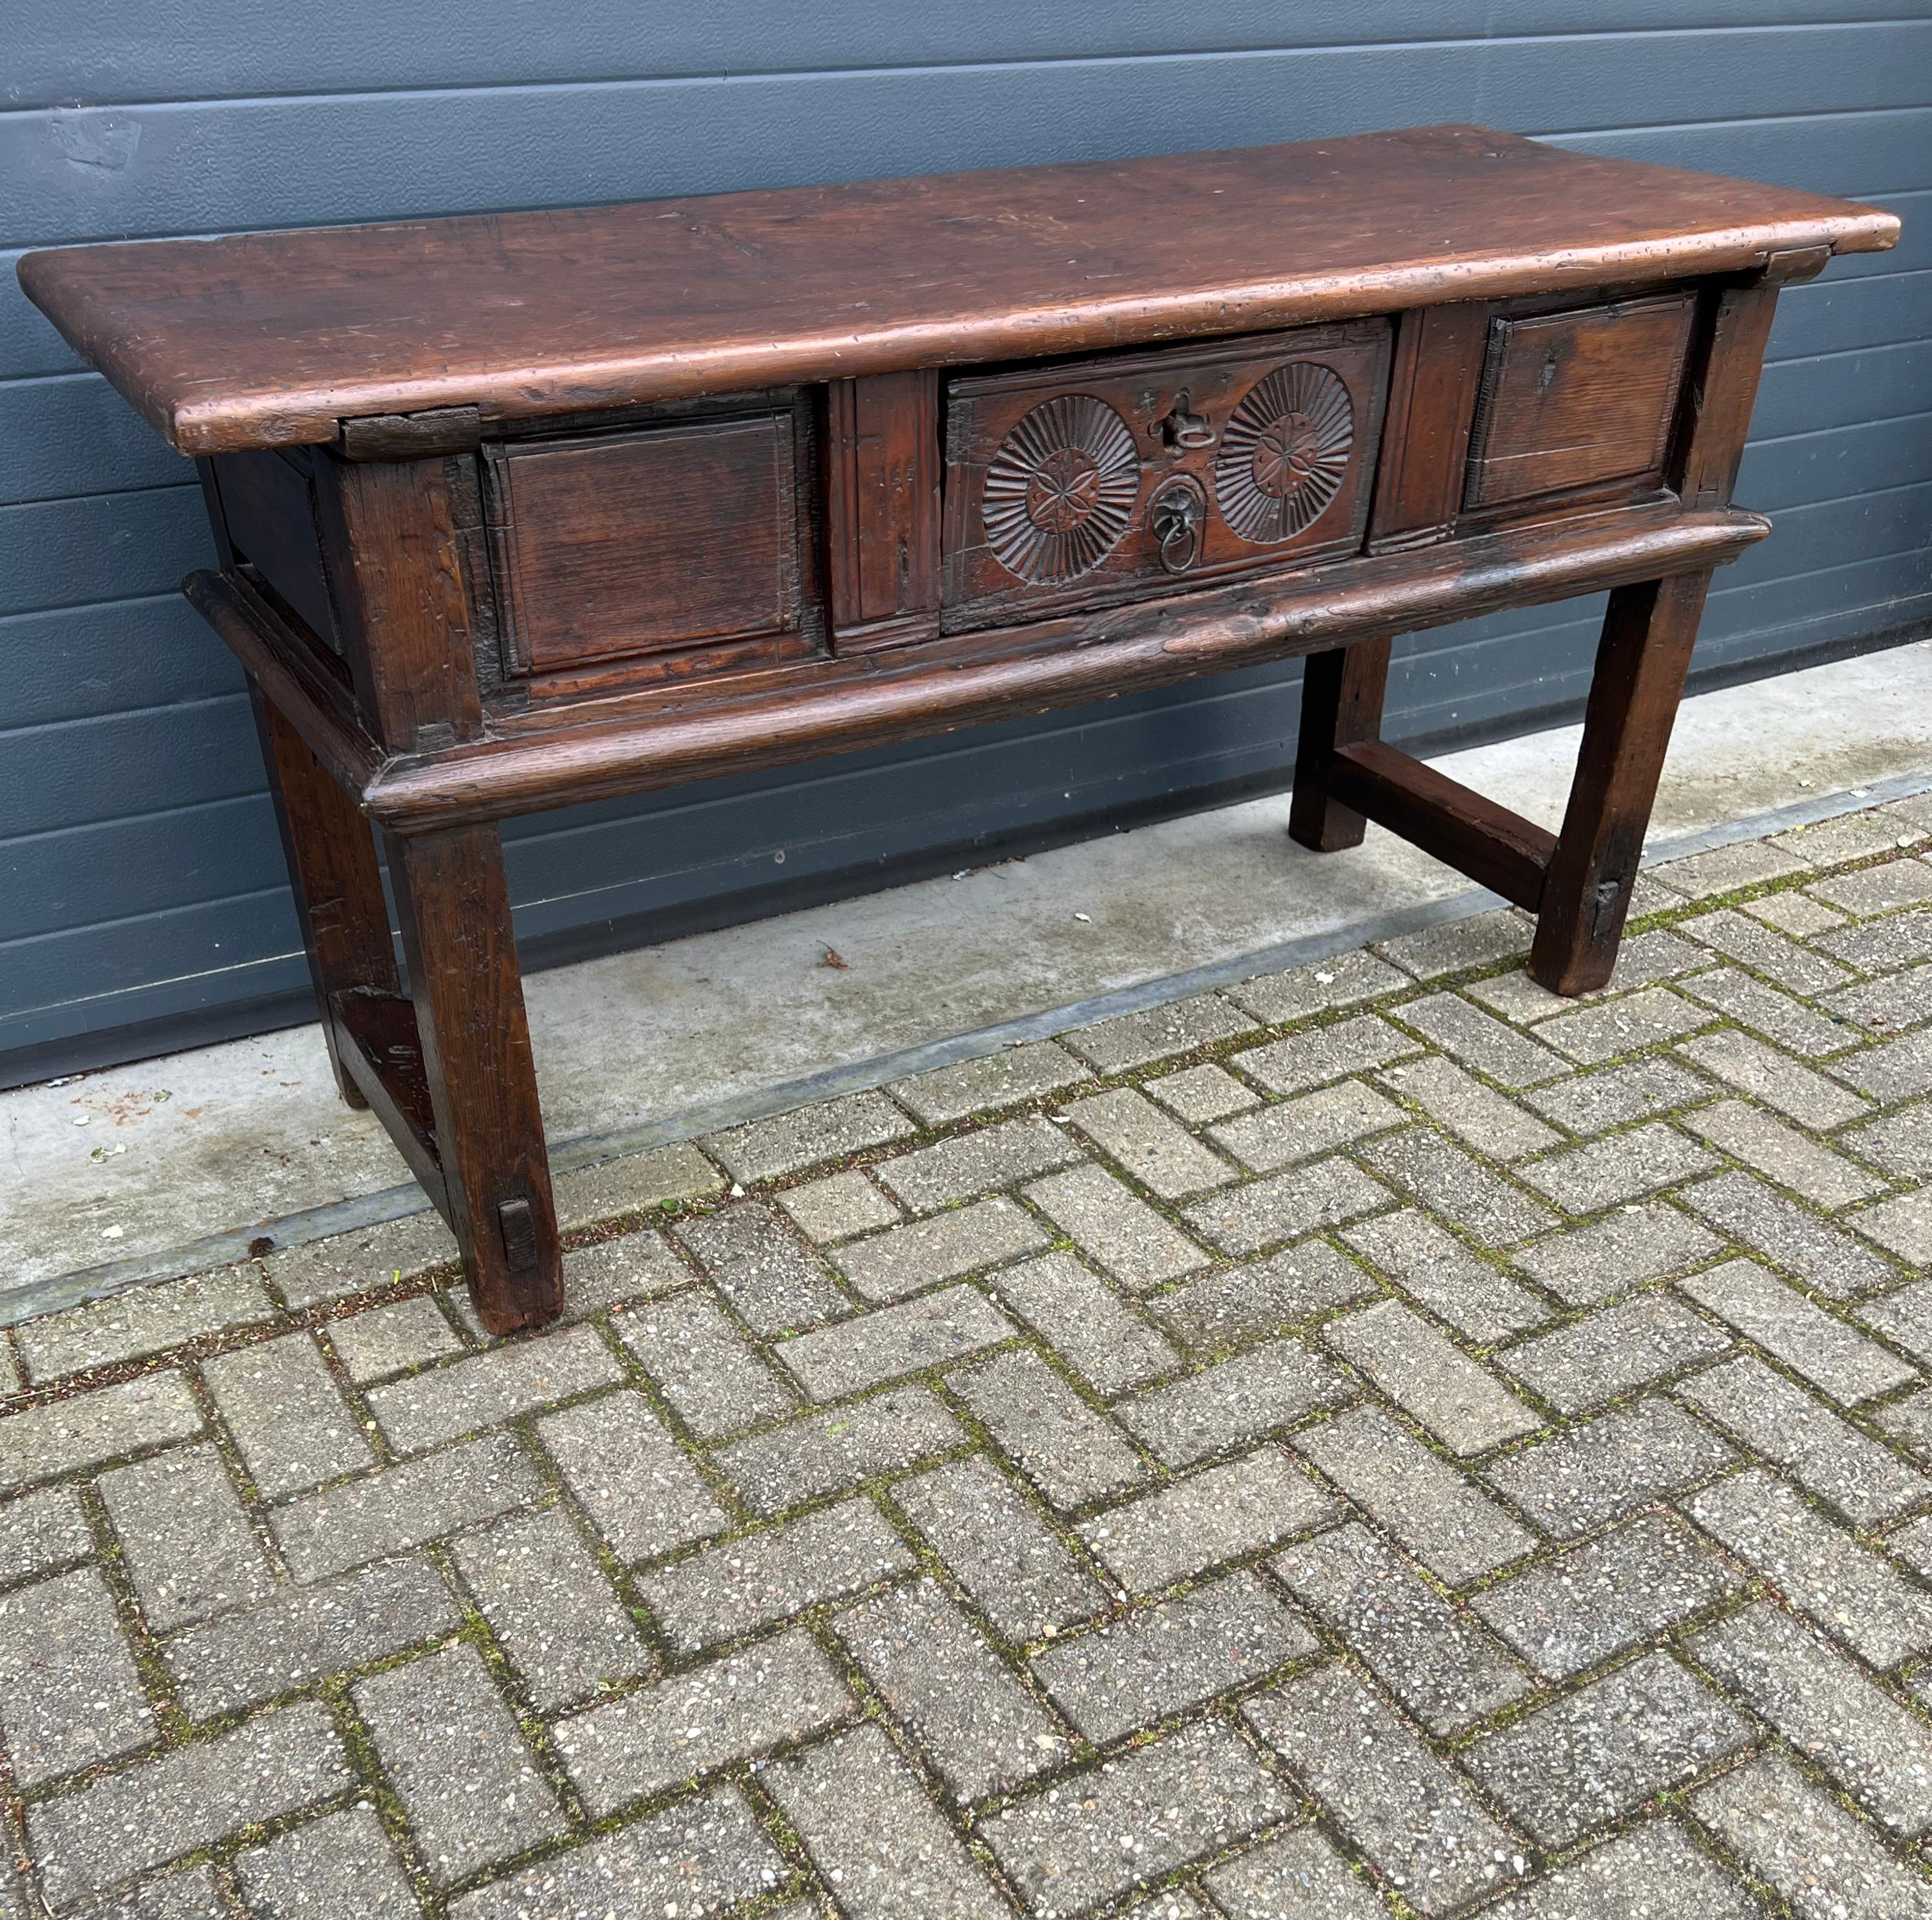 18th Century Antique and Rustic Mid 1700s Carved Chestnut Spanish Countryside Console Table For Sale